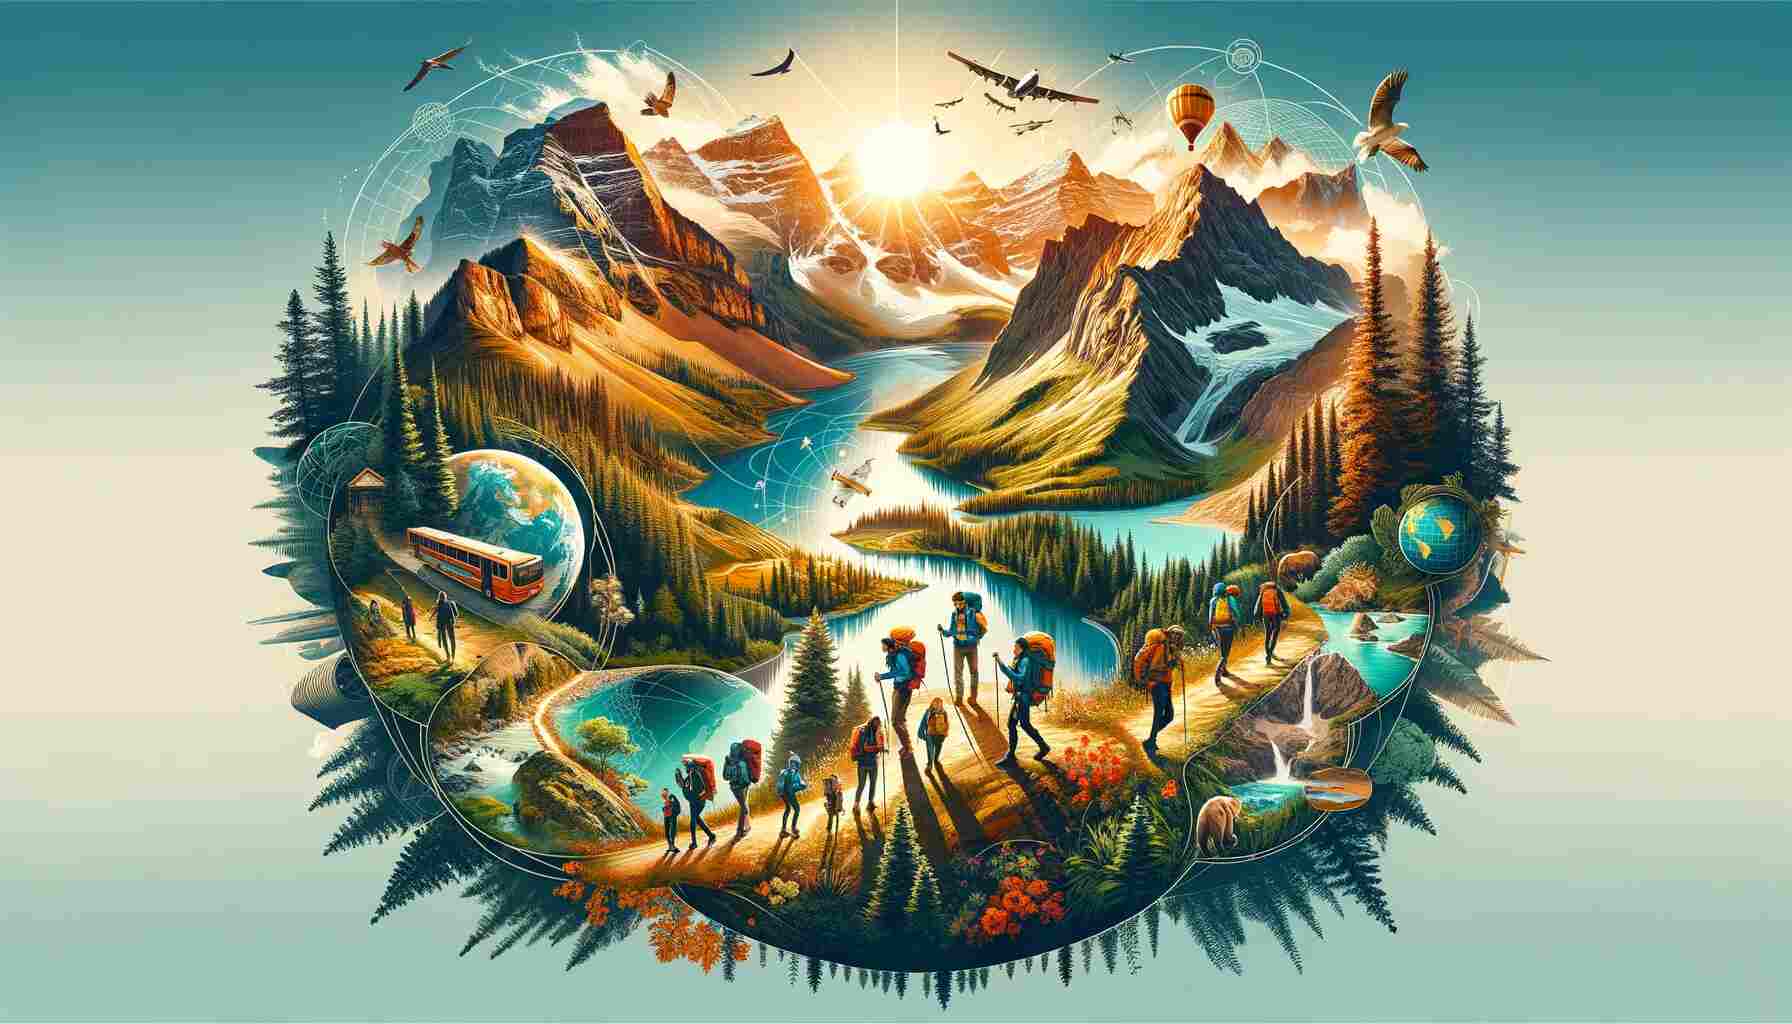 Featured image for 'Add These 10 Hiking Trails To Your 2024 Travel Bucket List' article, depicting a vibrant montage of diverse hiking landscapes. The image includes majestic mountains, lush forests, serene lakes, and rugged coastal paths. It features small figures of hikers exploring these varied terrains, symbolizing adventure and exploration. The composition is vibrant and inviting, embodying the spirit of global hiking adventures and encouraging readers to discover incredible trails around the world.